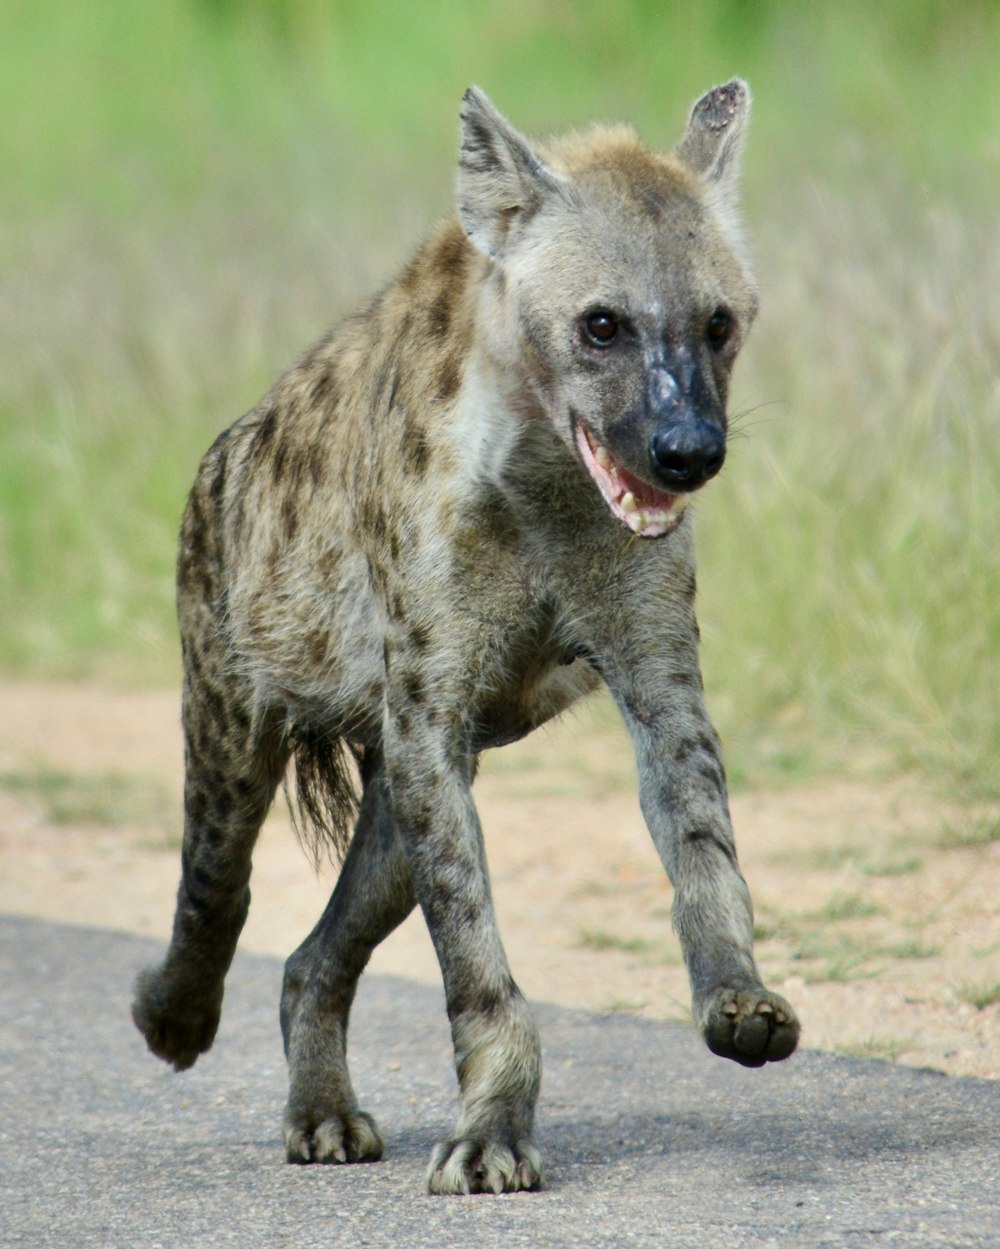 a hyena running across a road with its mouth open